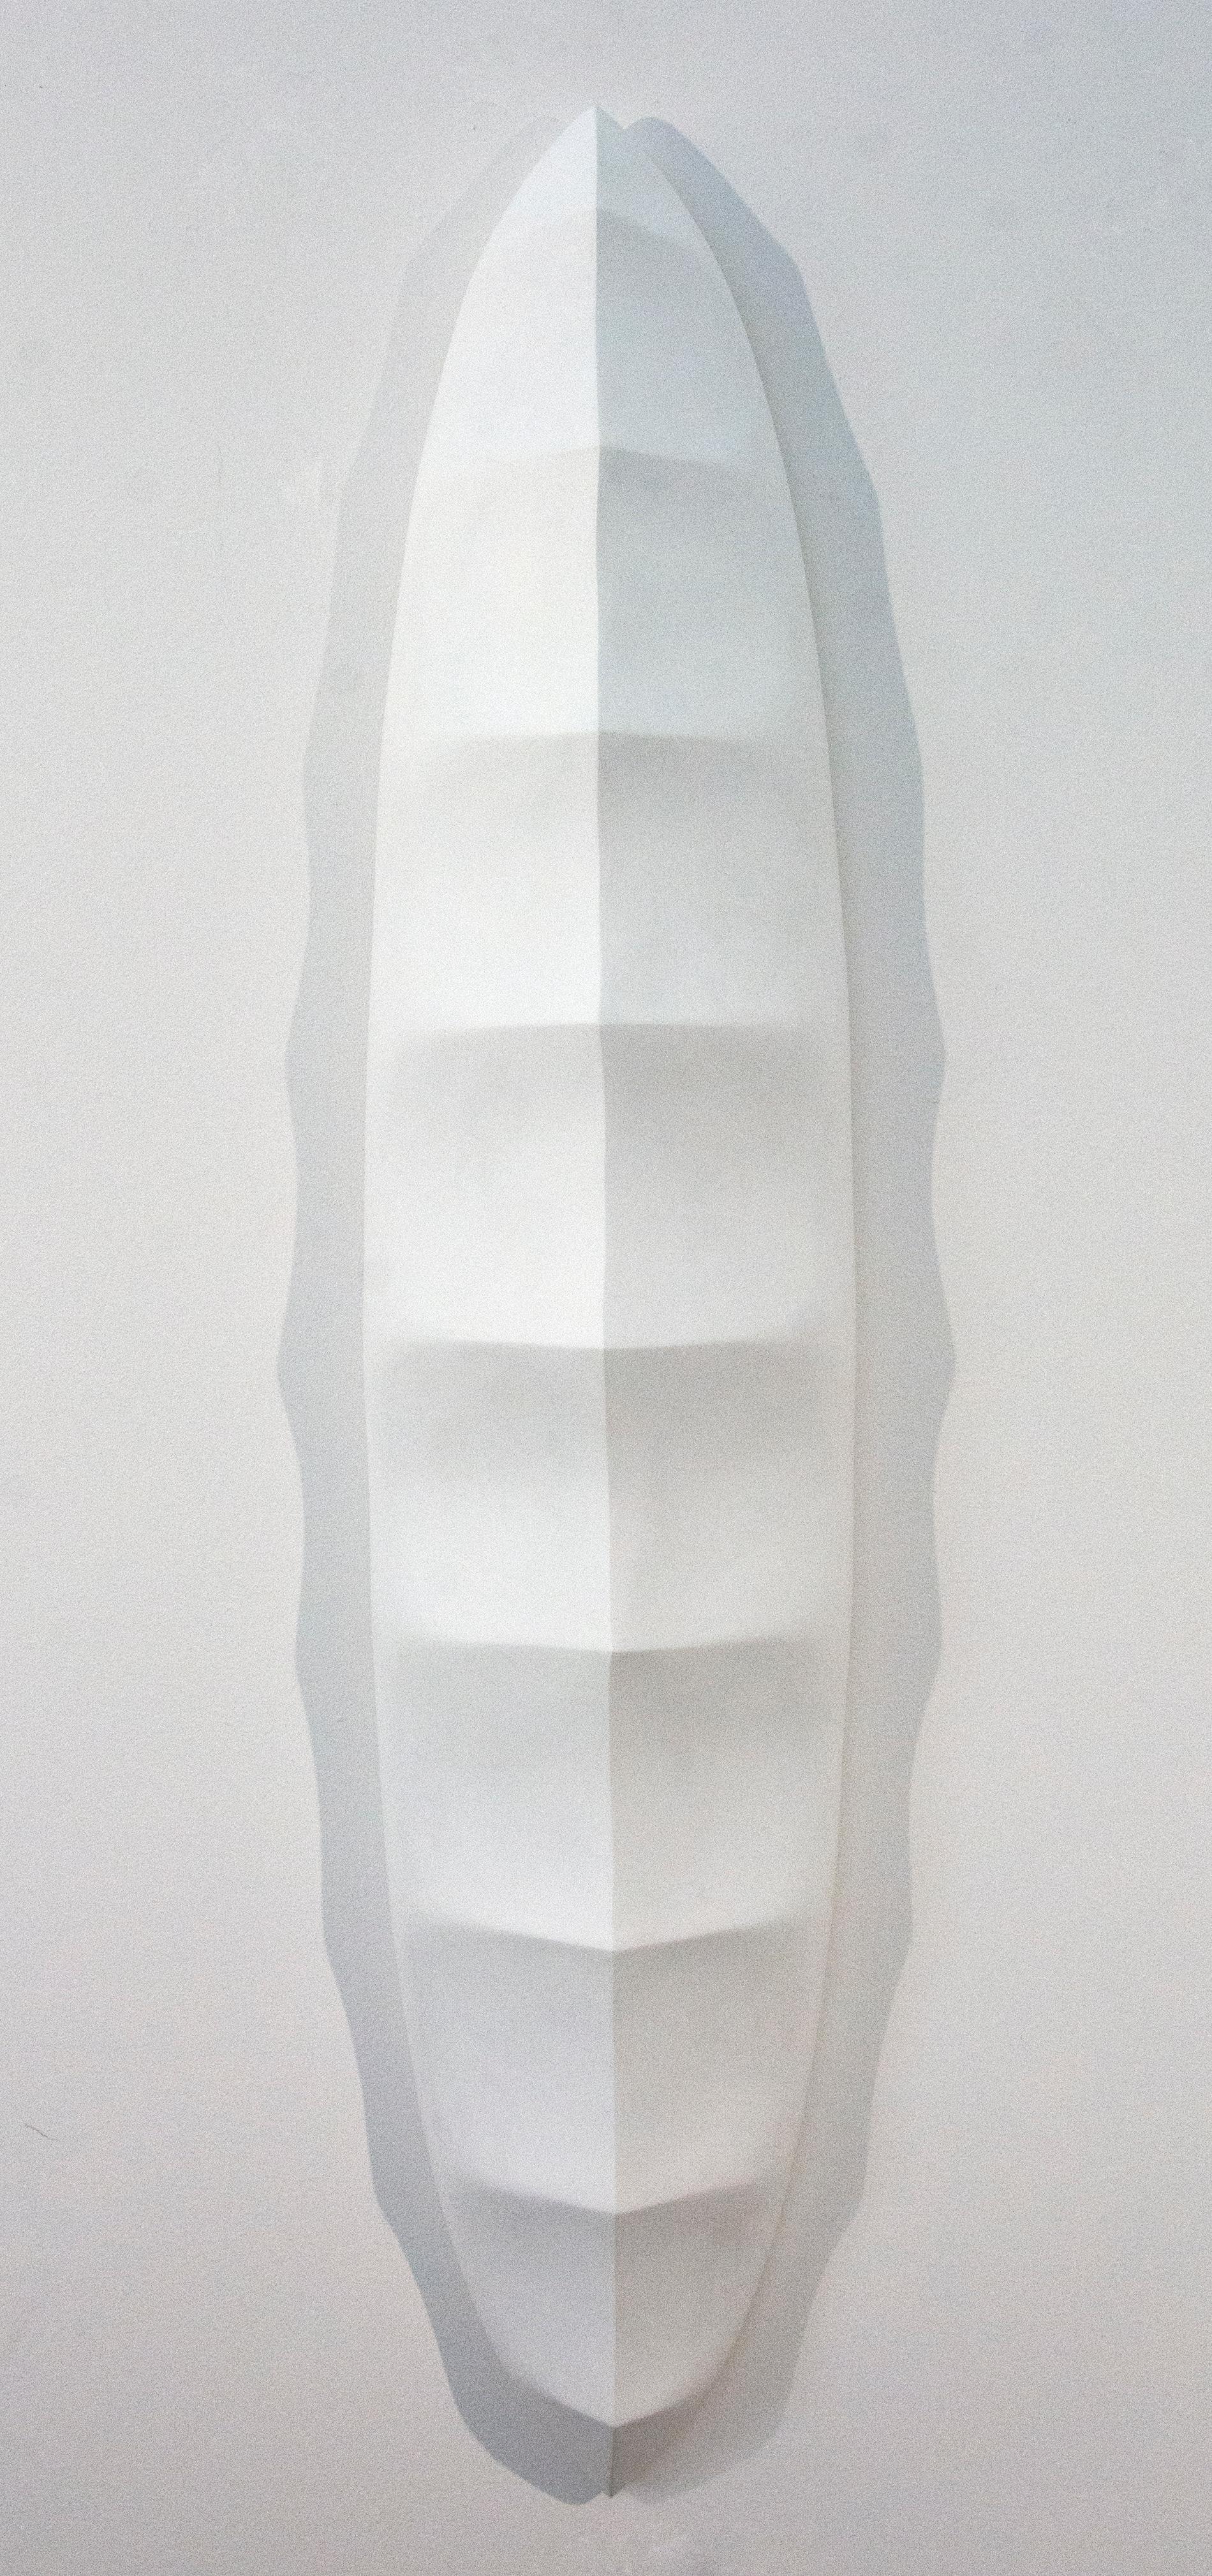 Biomorphic No 3 - bright, white, minimal, abstract, plaster and wax wall relief - Contemporary Sculpture by Jana Osterman